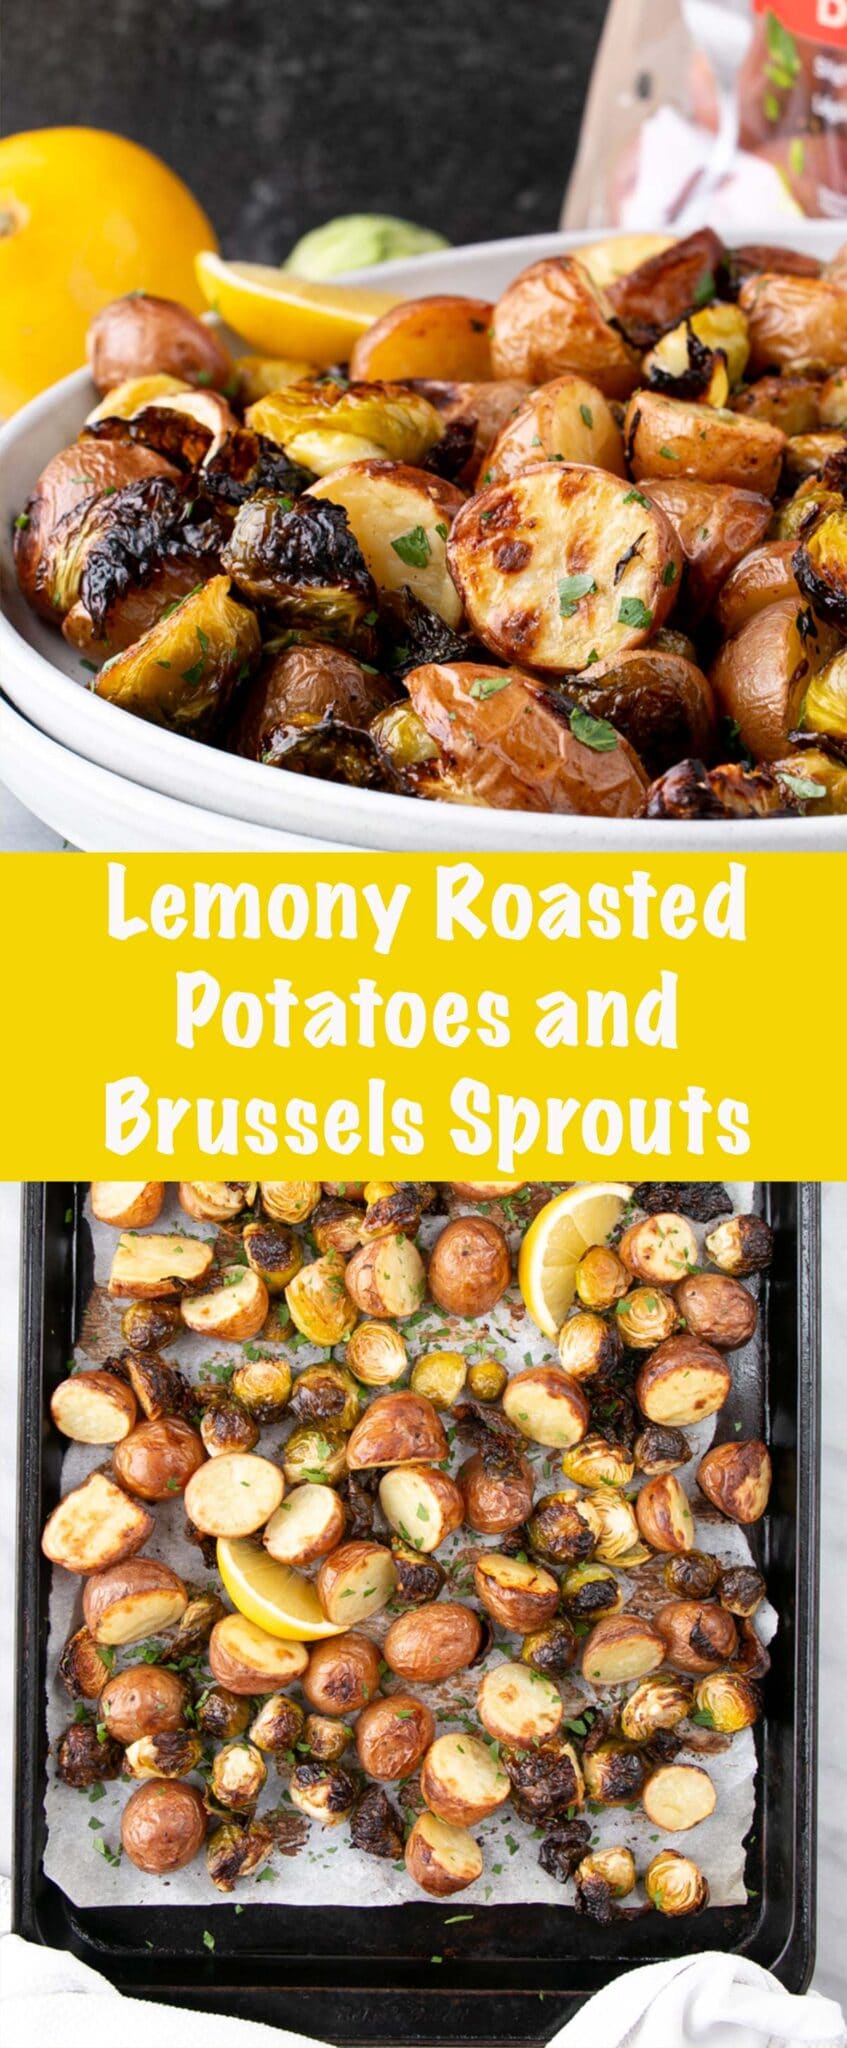 Crispy tender Potatoes and Brussels Sprouts with bright lemony flavour. The perfect side dish for a Sunday Supper or the Holidays. #potatoes #recipe #ad via @mykitchenlove